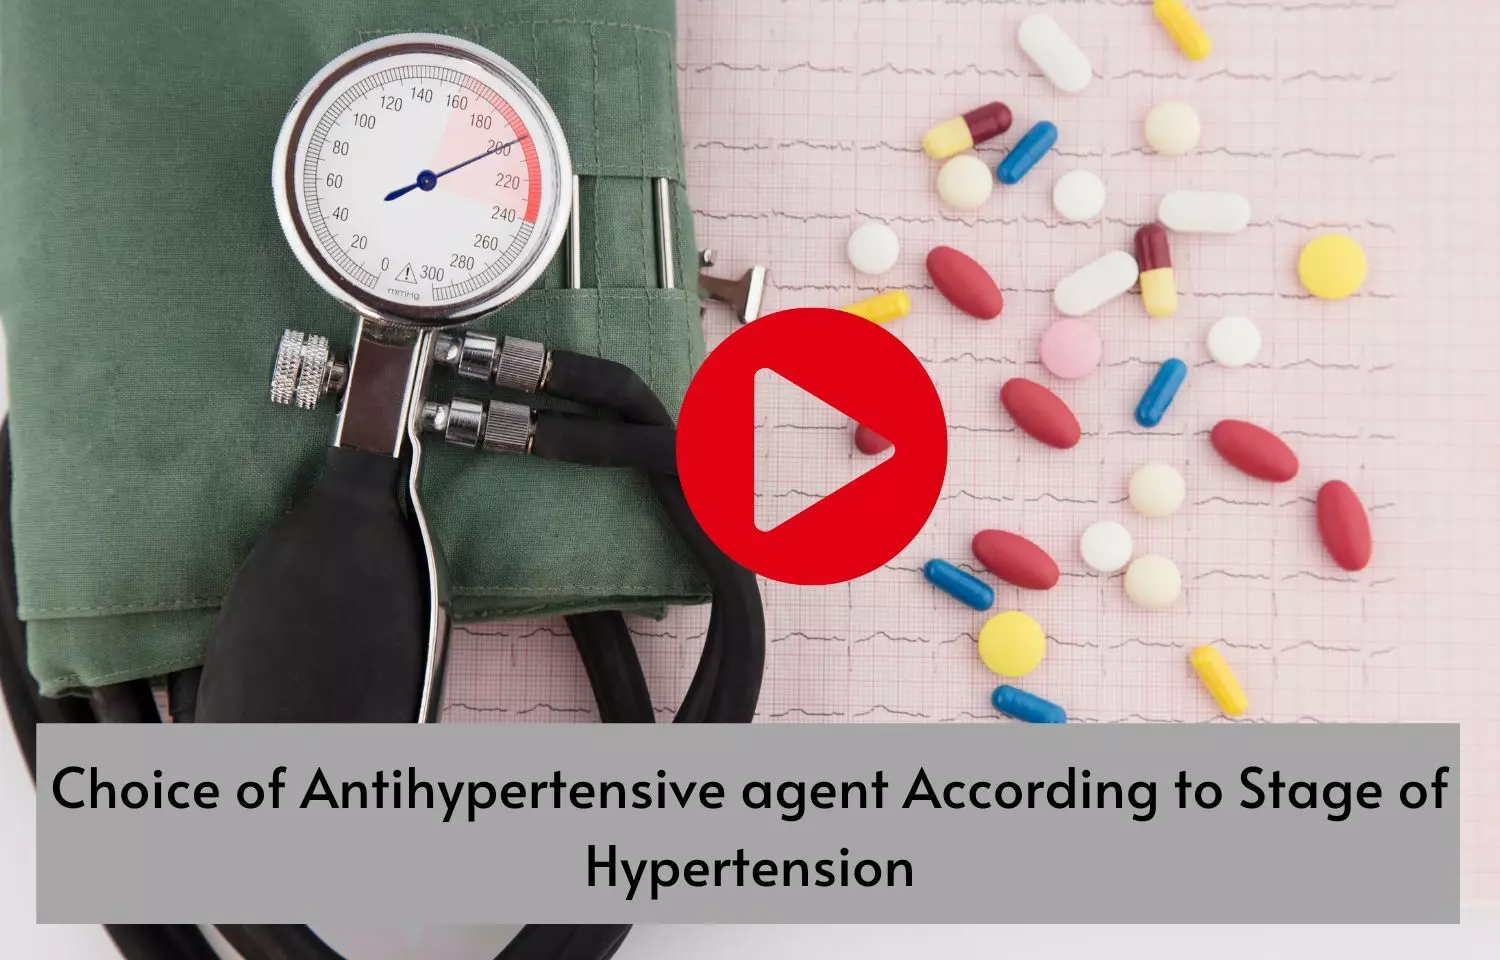 Choice of Antihypertensive agent According to Stage of Hypertension